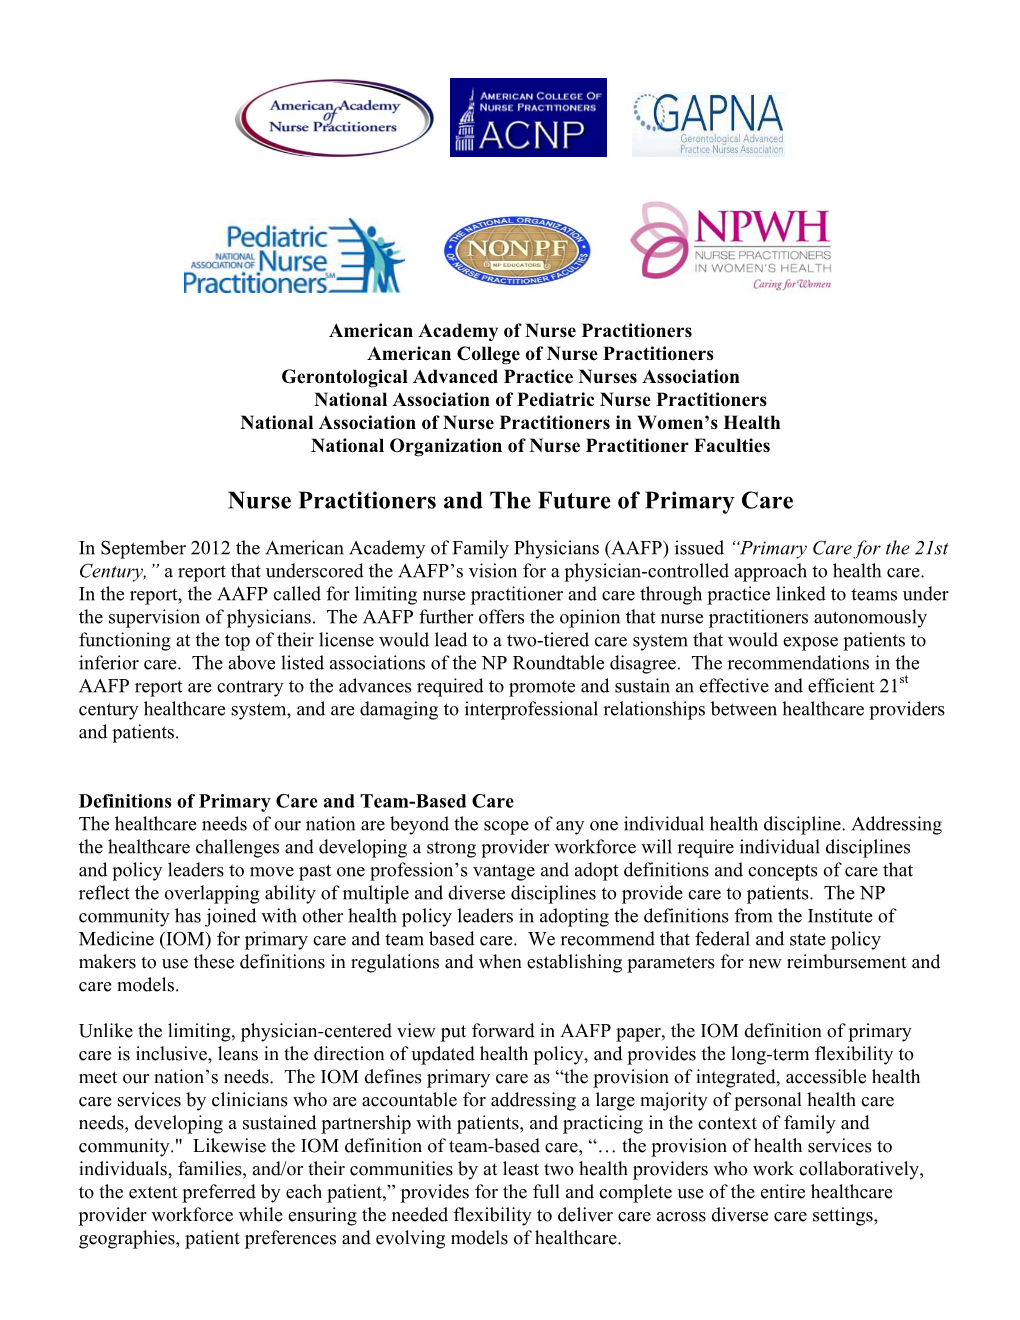 Nurse Practitioners and the Future of Primary Care